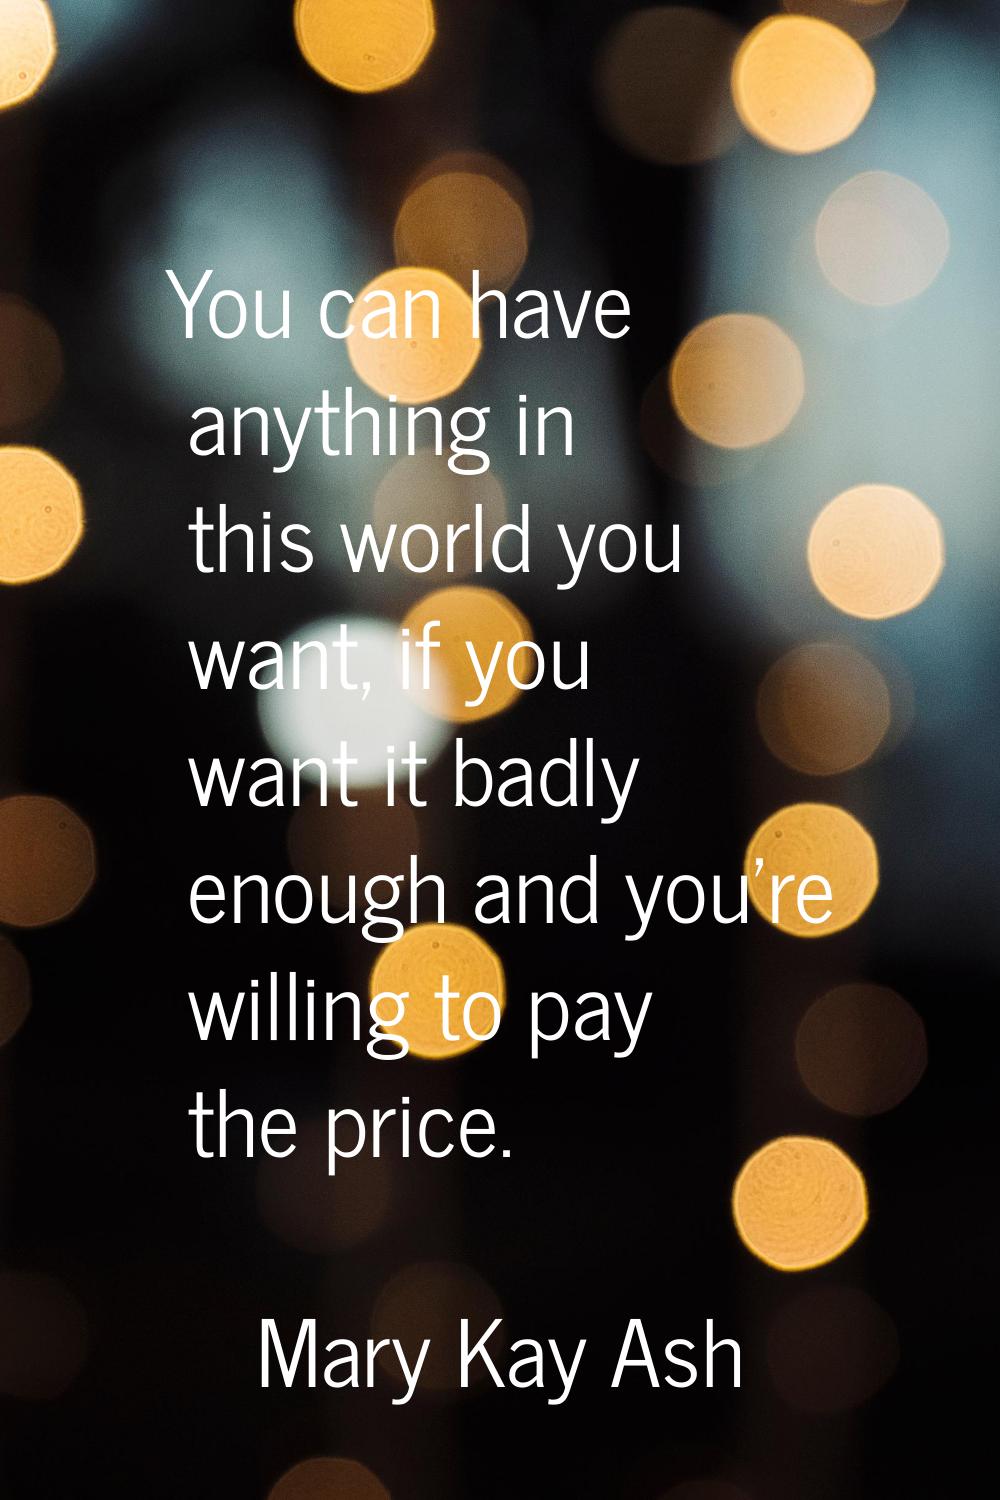 You can have anything in this world you want, if you want it badly enough and you're willing to pay